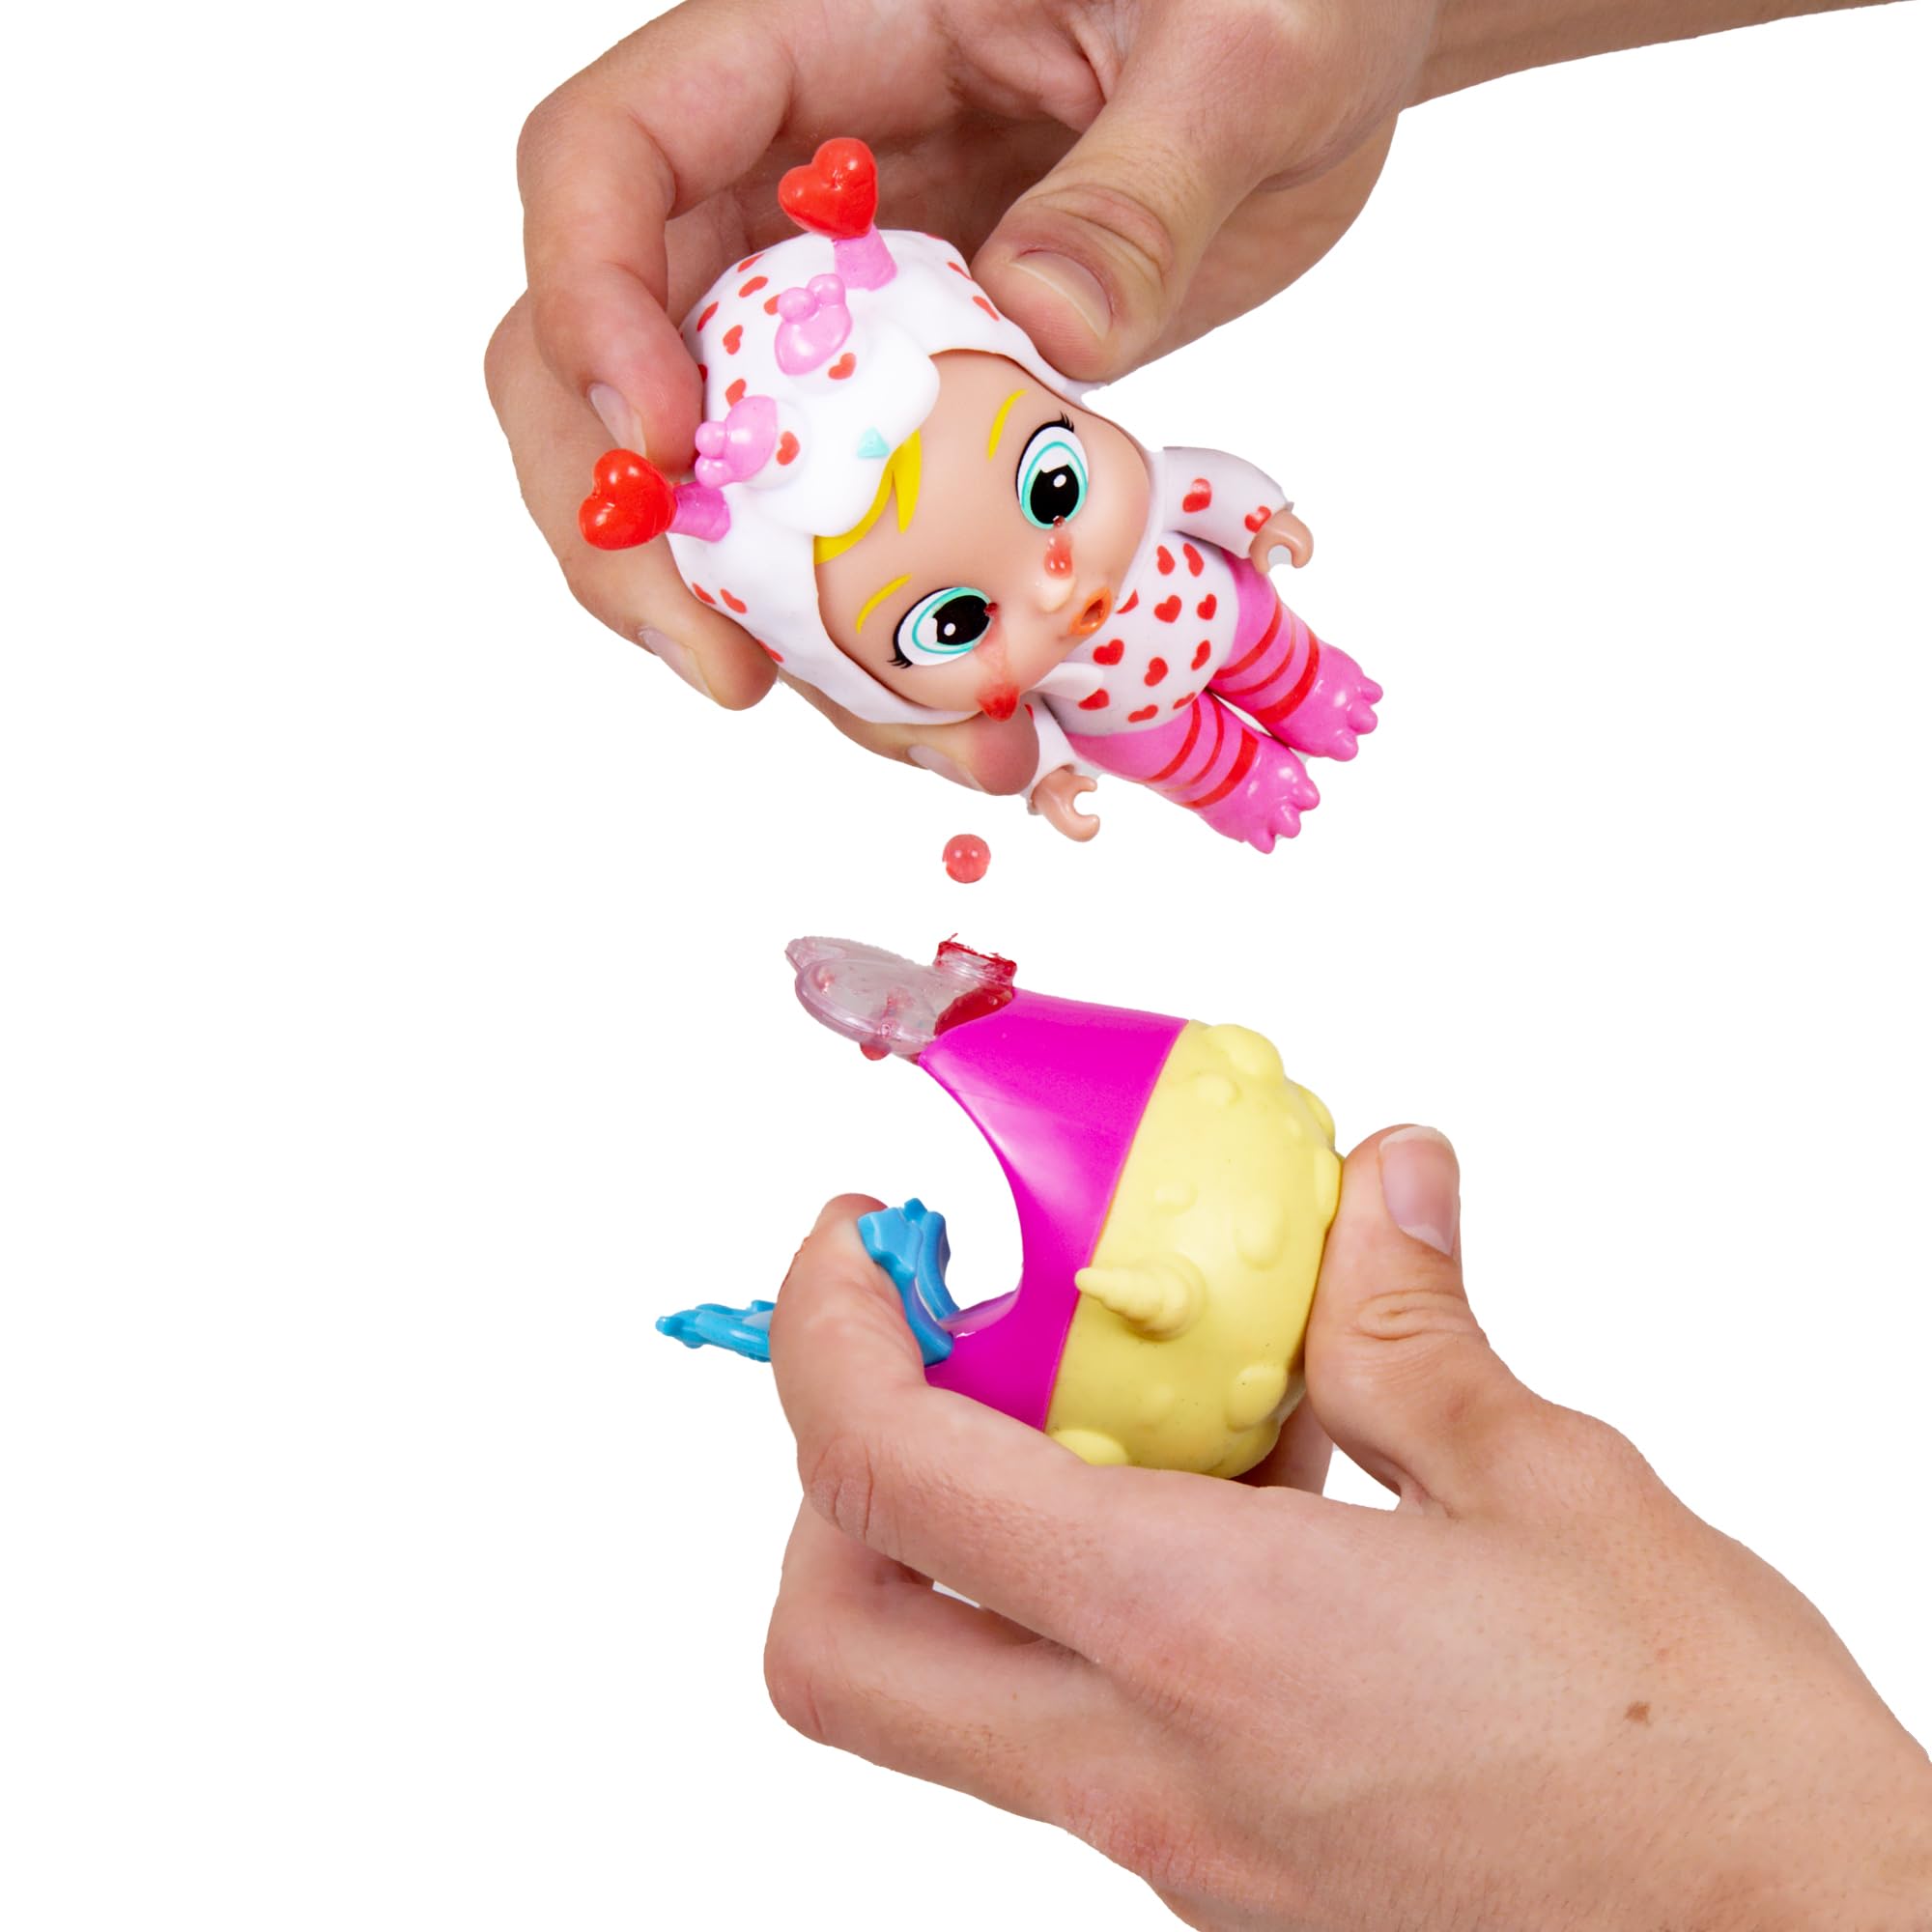 Cry Babies Magic Tears Jumpy Monsters - 7+ Surprise Accessories, Doll | Kids Age 3+